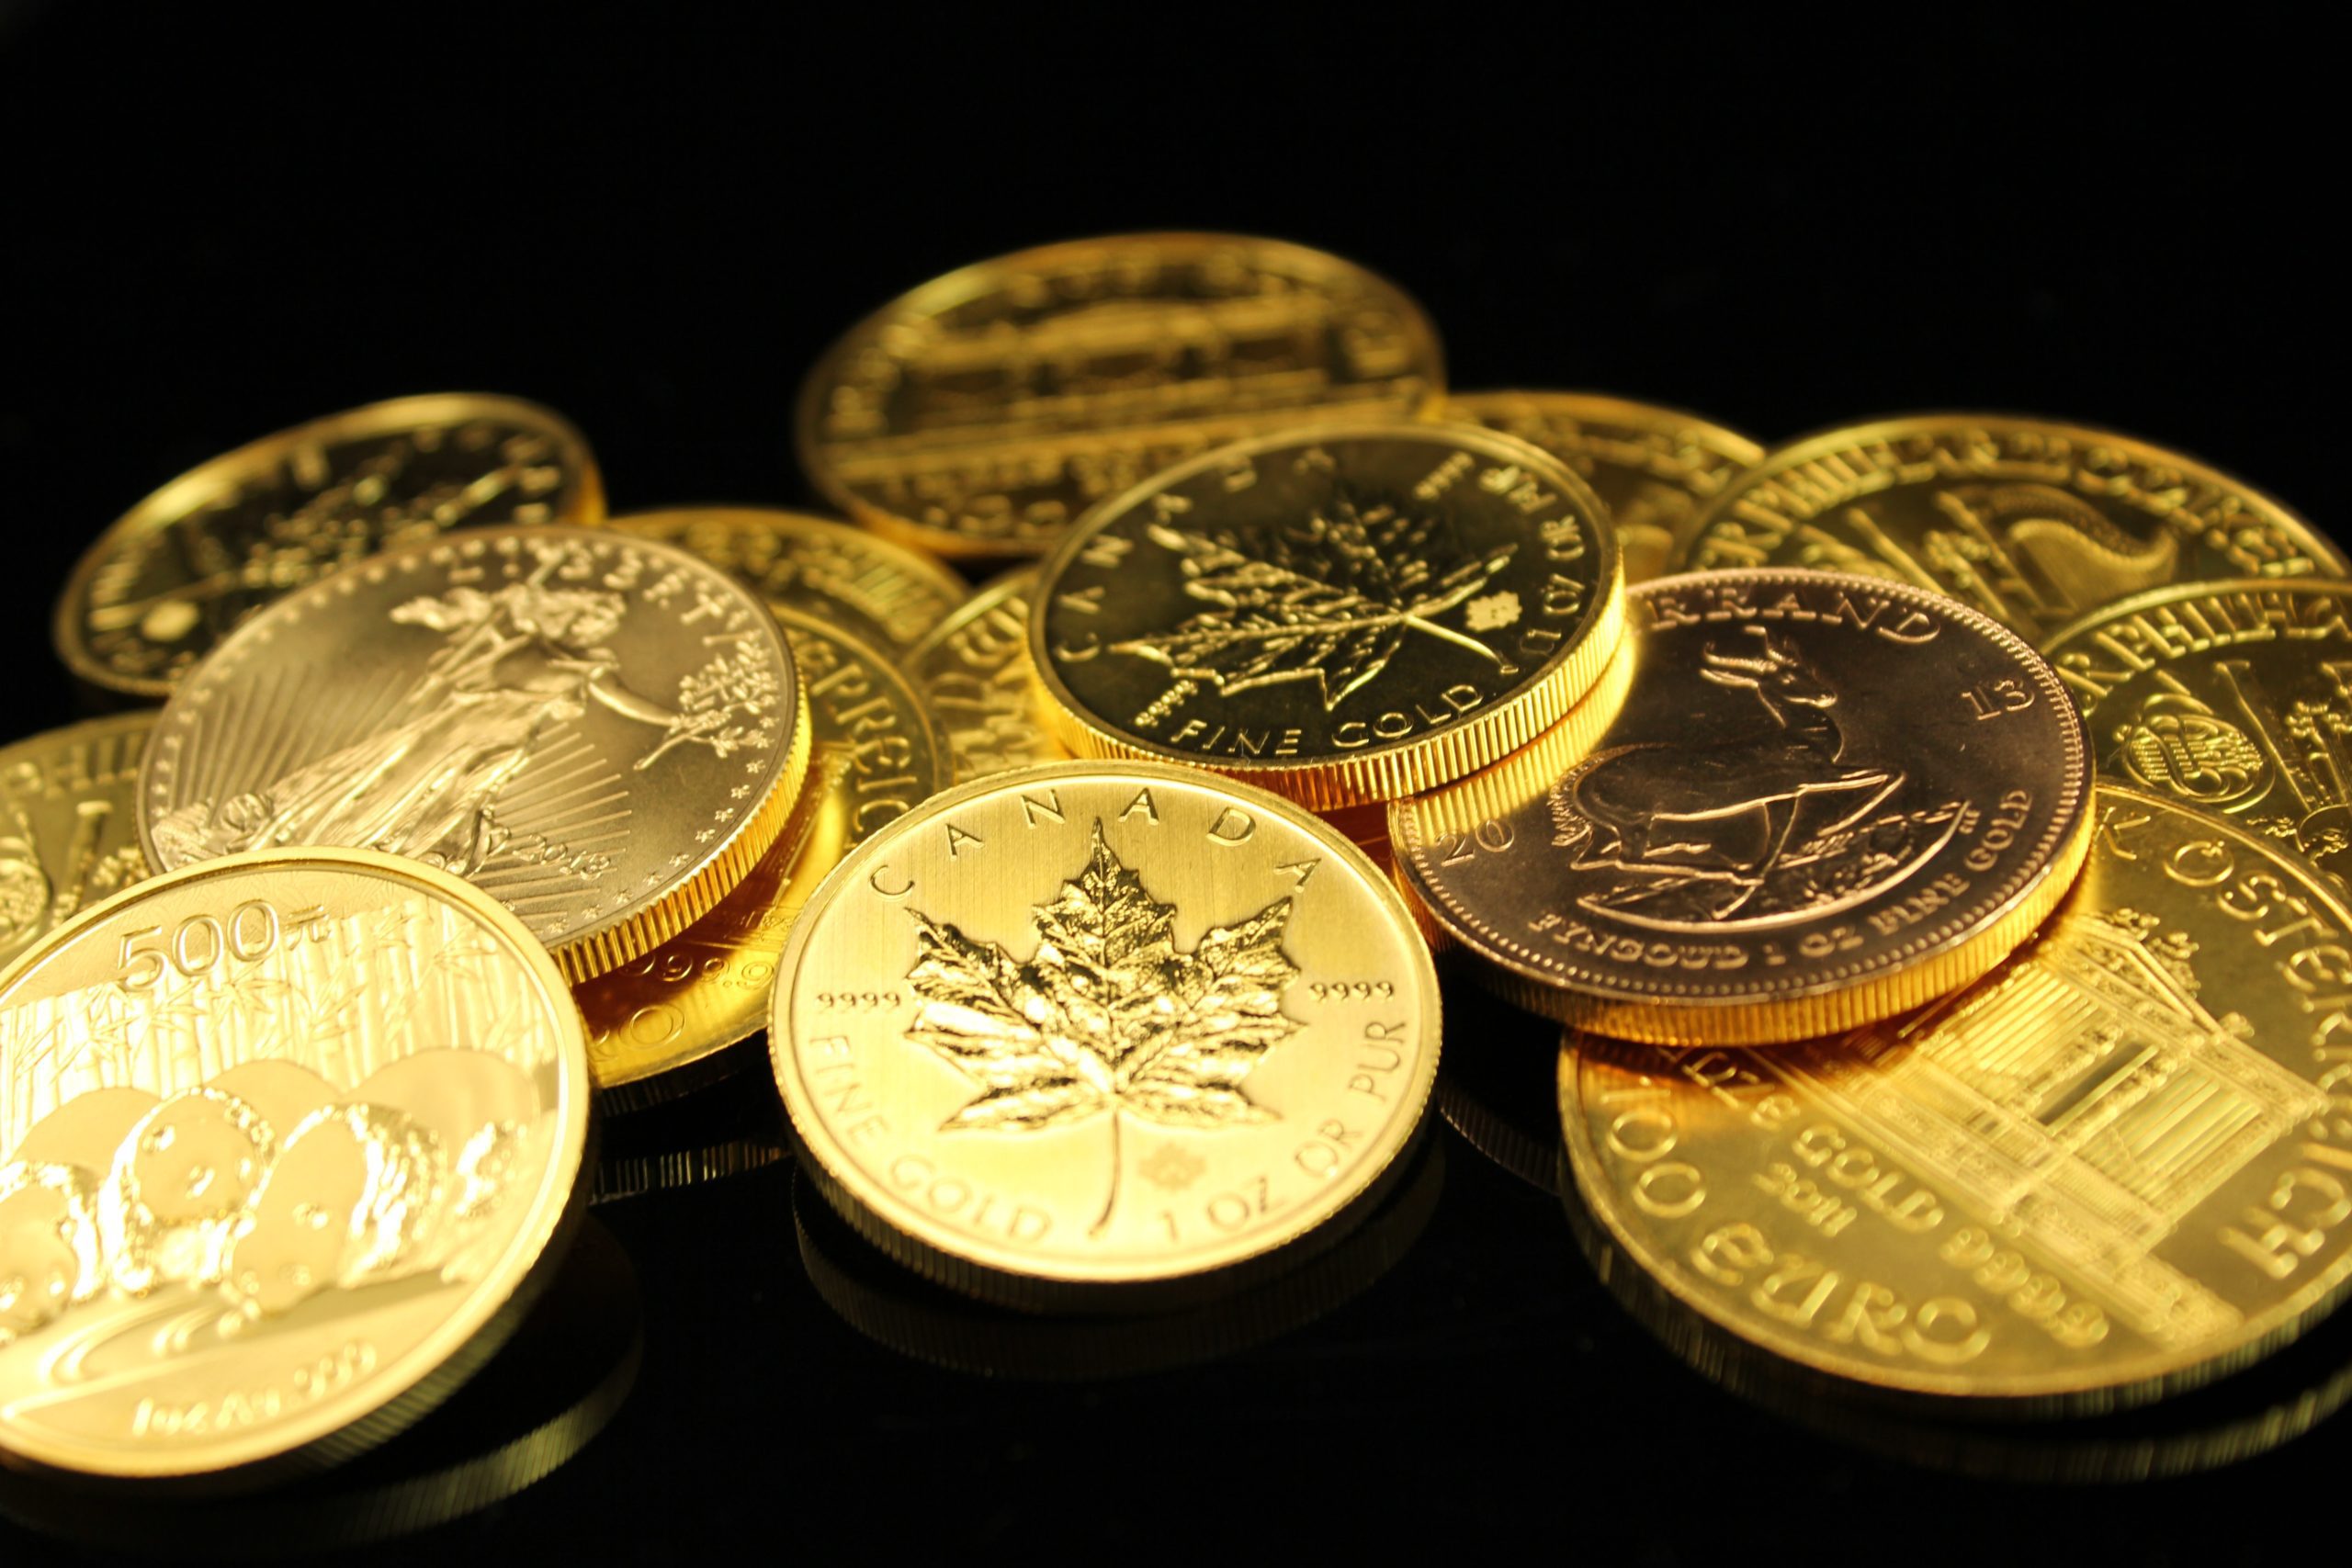 Image of gold coins in a pile